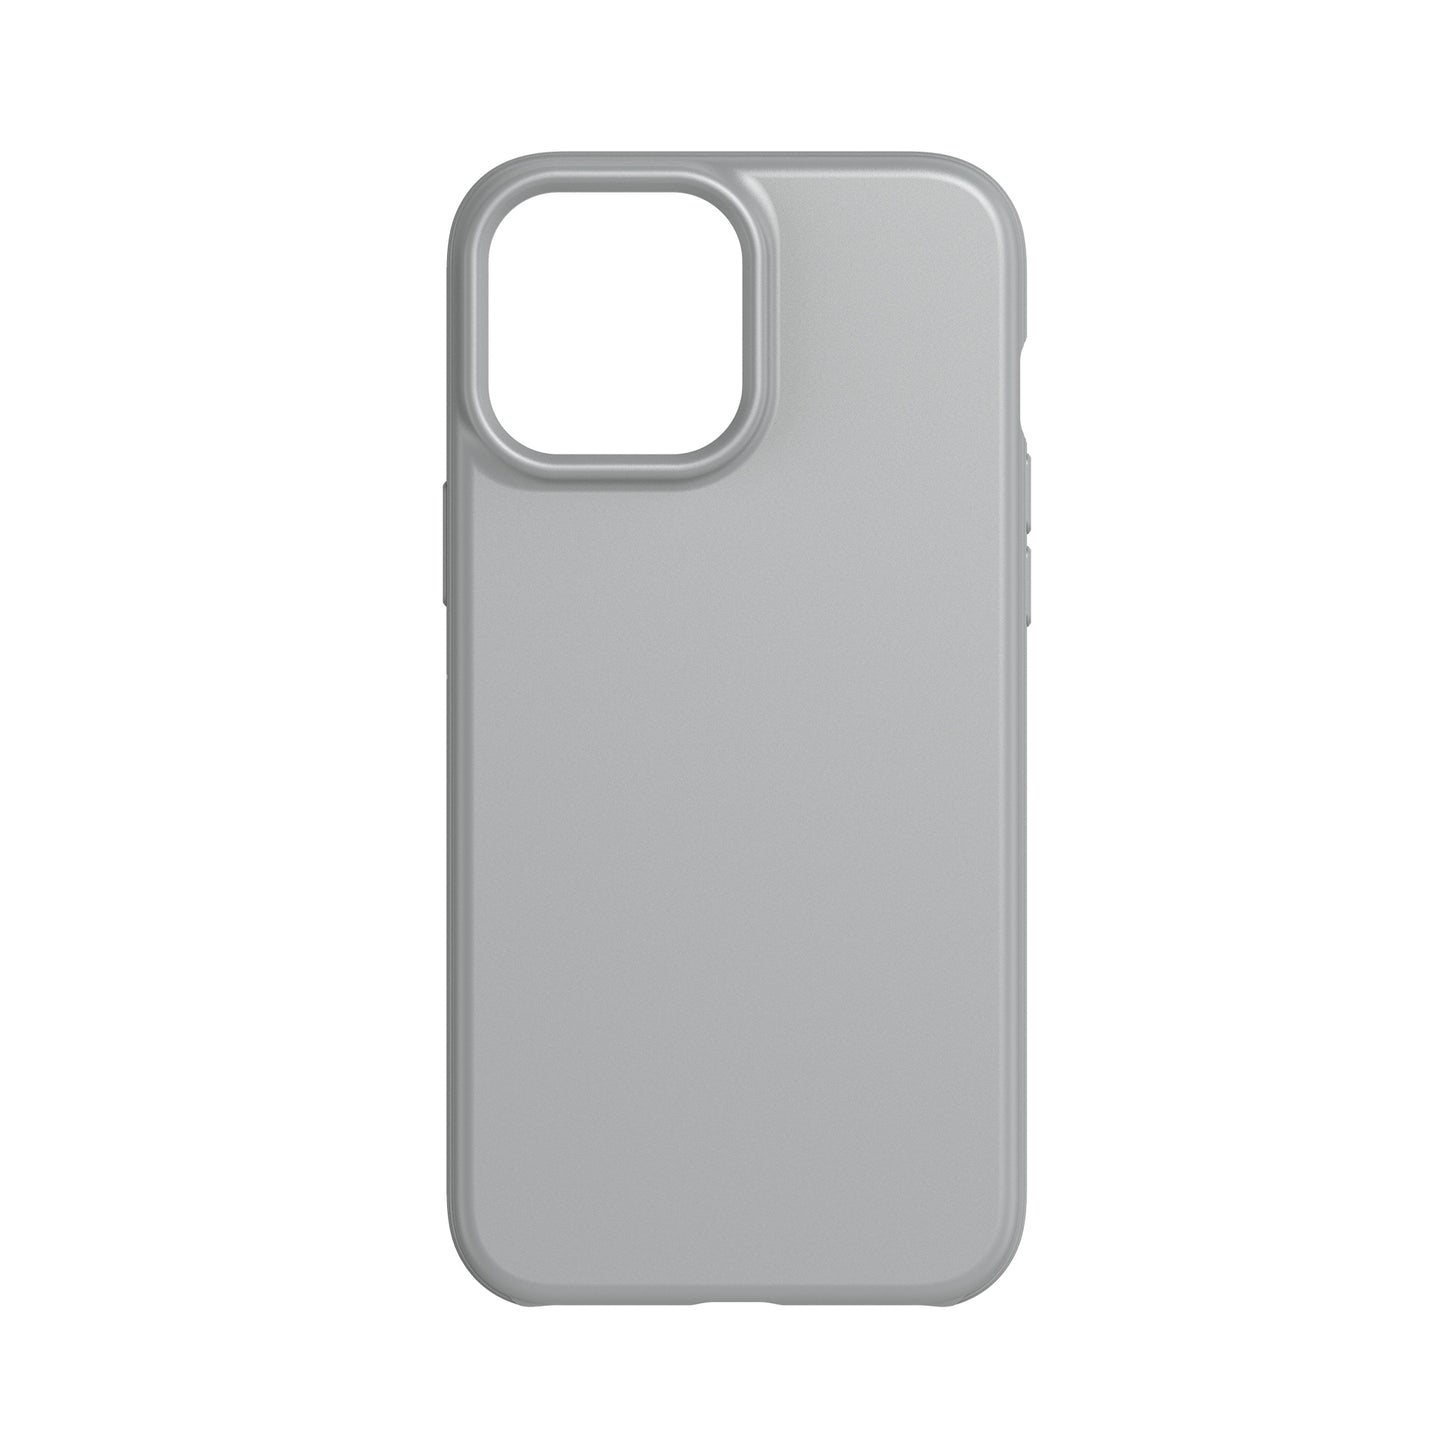 TECH21 EvoLite for iPhone 13 Pro Max - Cool Grey